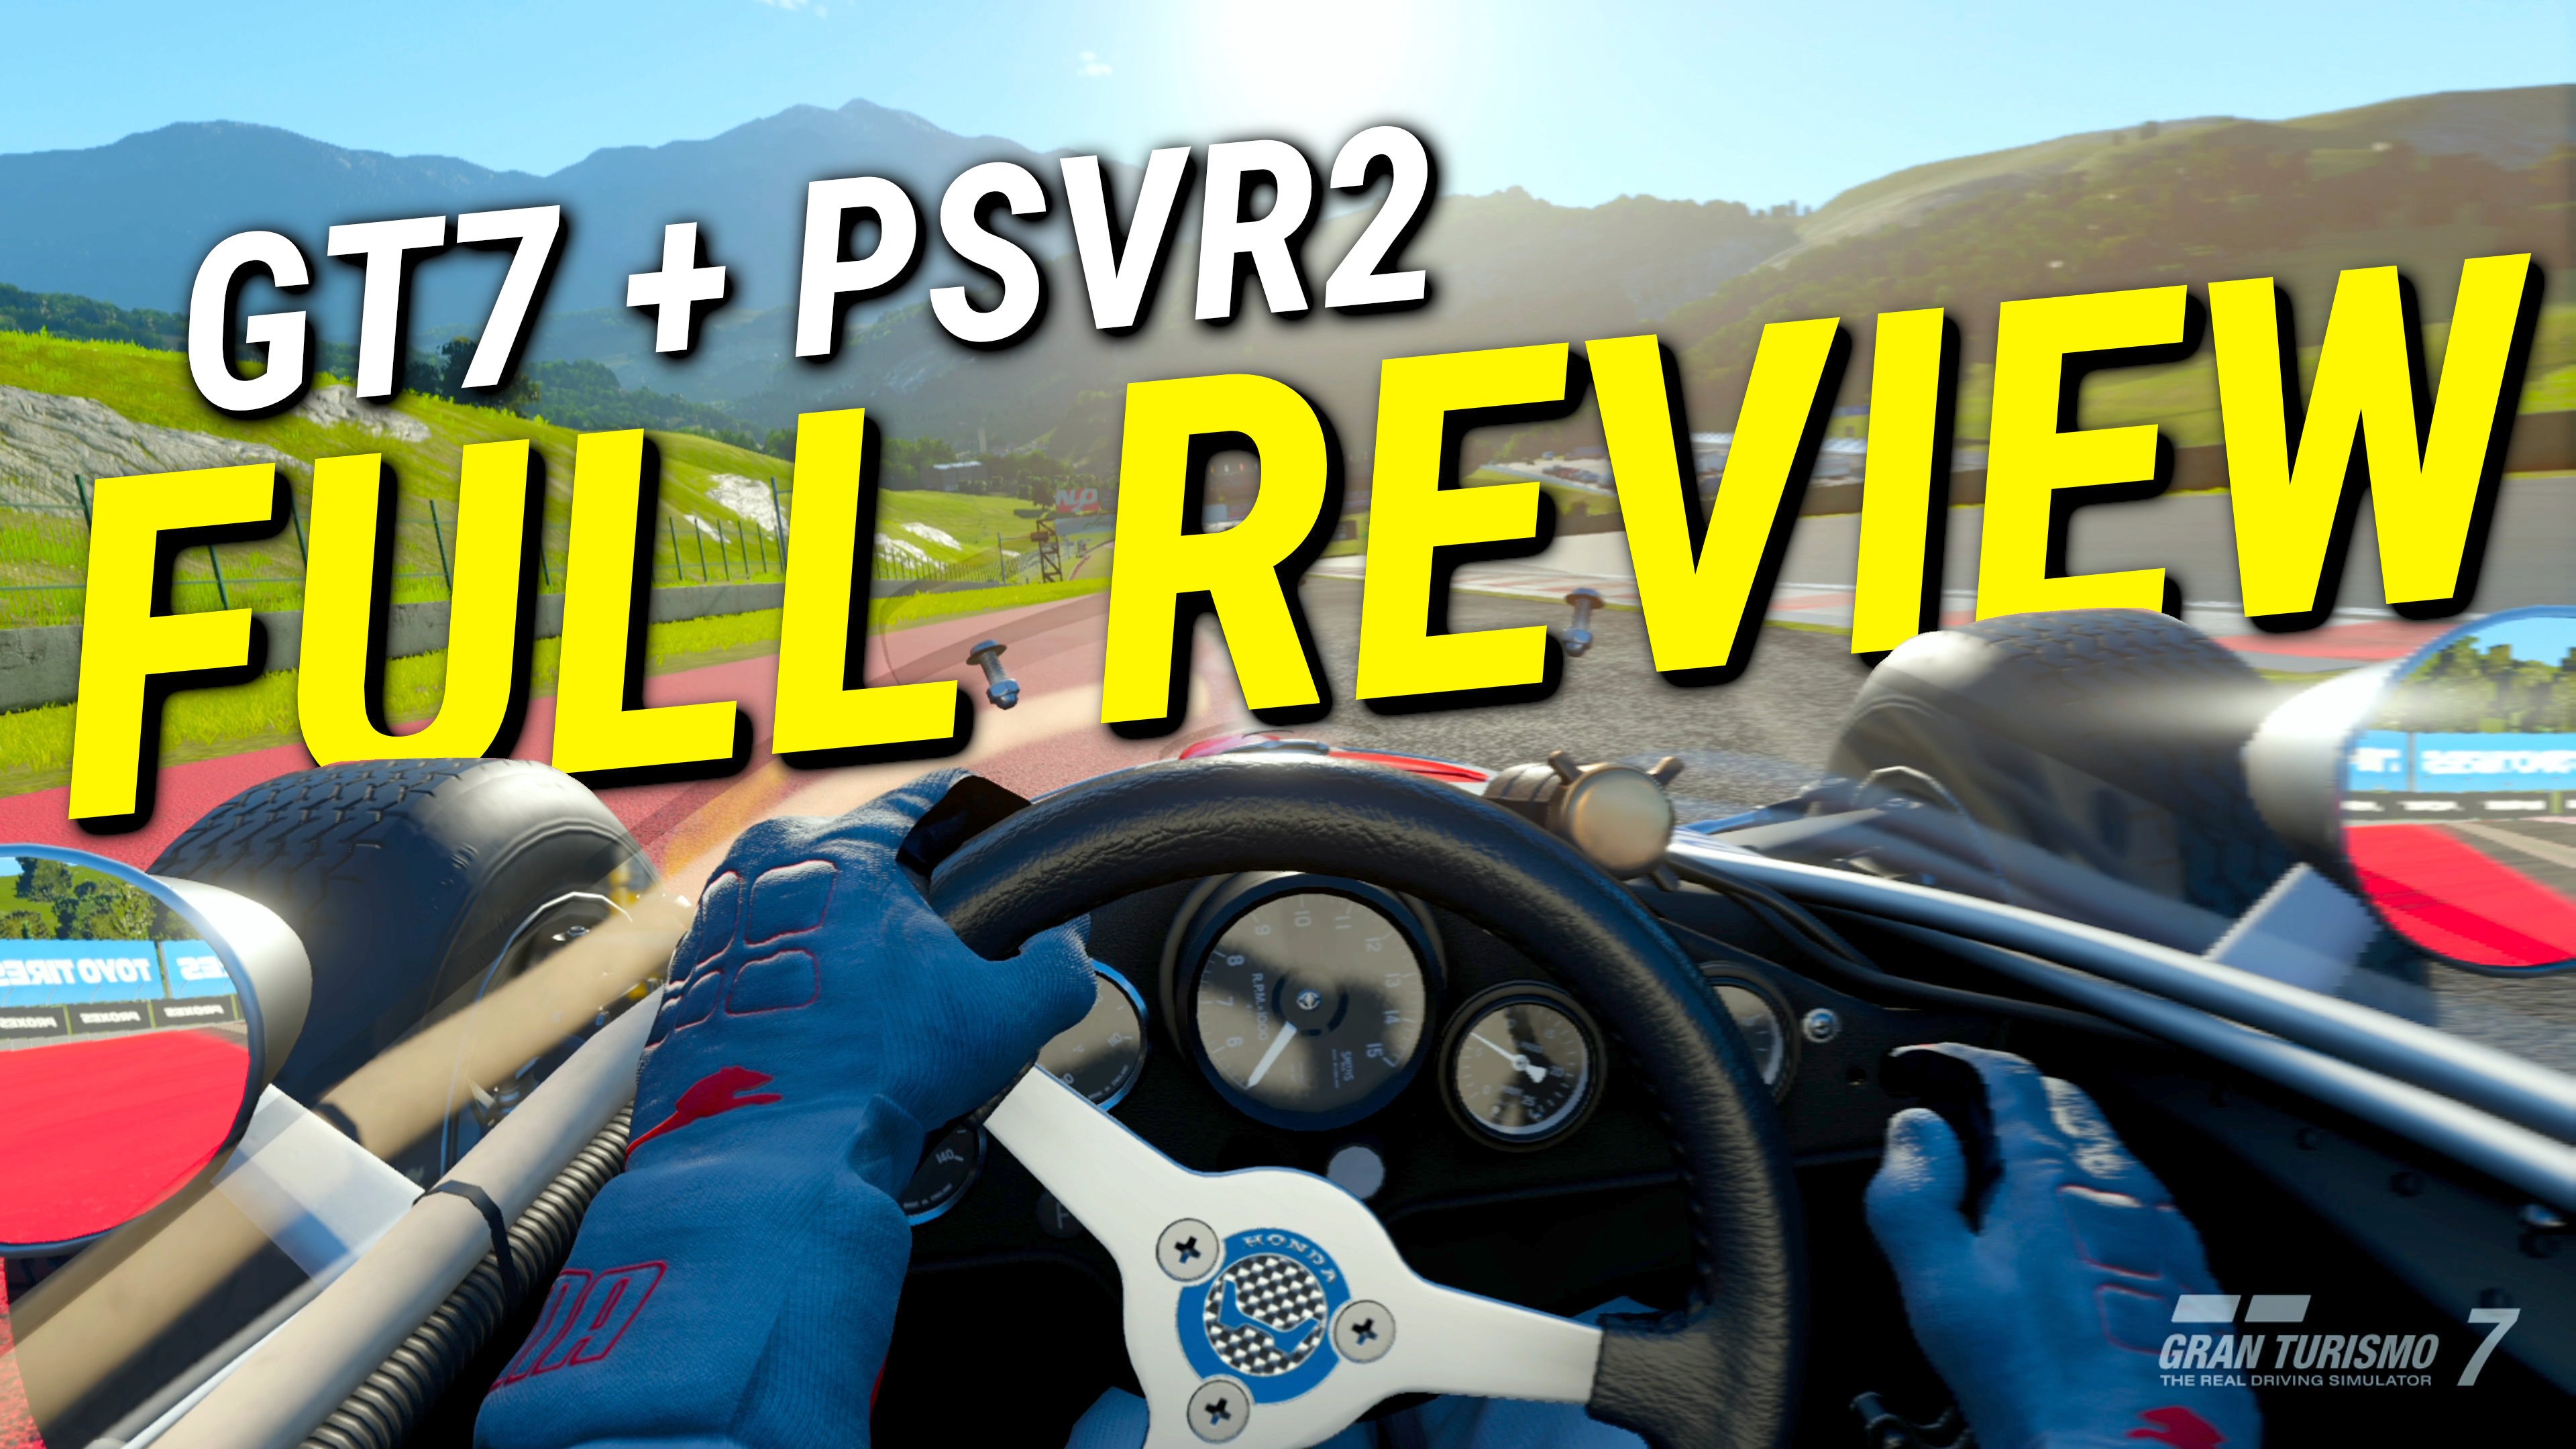 Gran Turismo 7 and PSVR 2 Review: Gimmick or Game Changer?